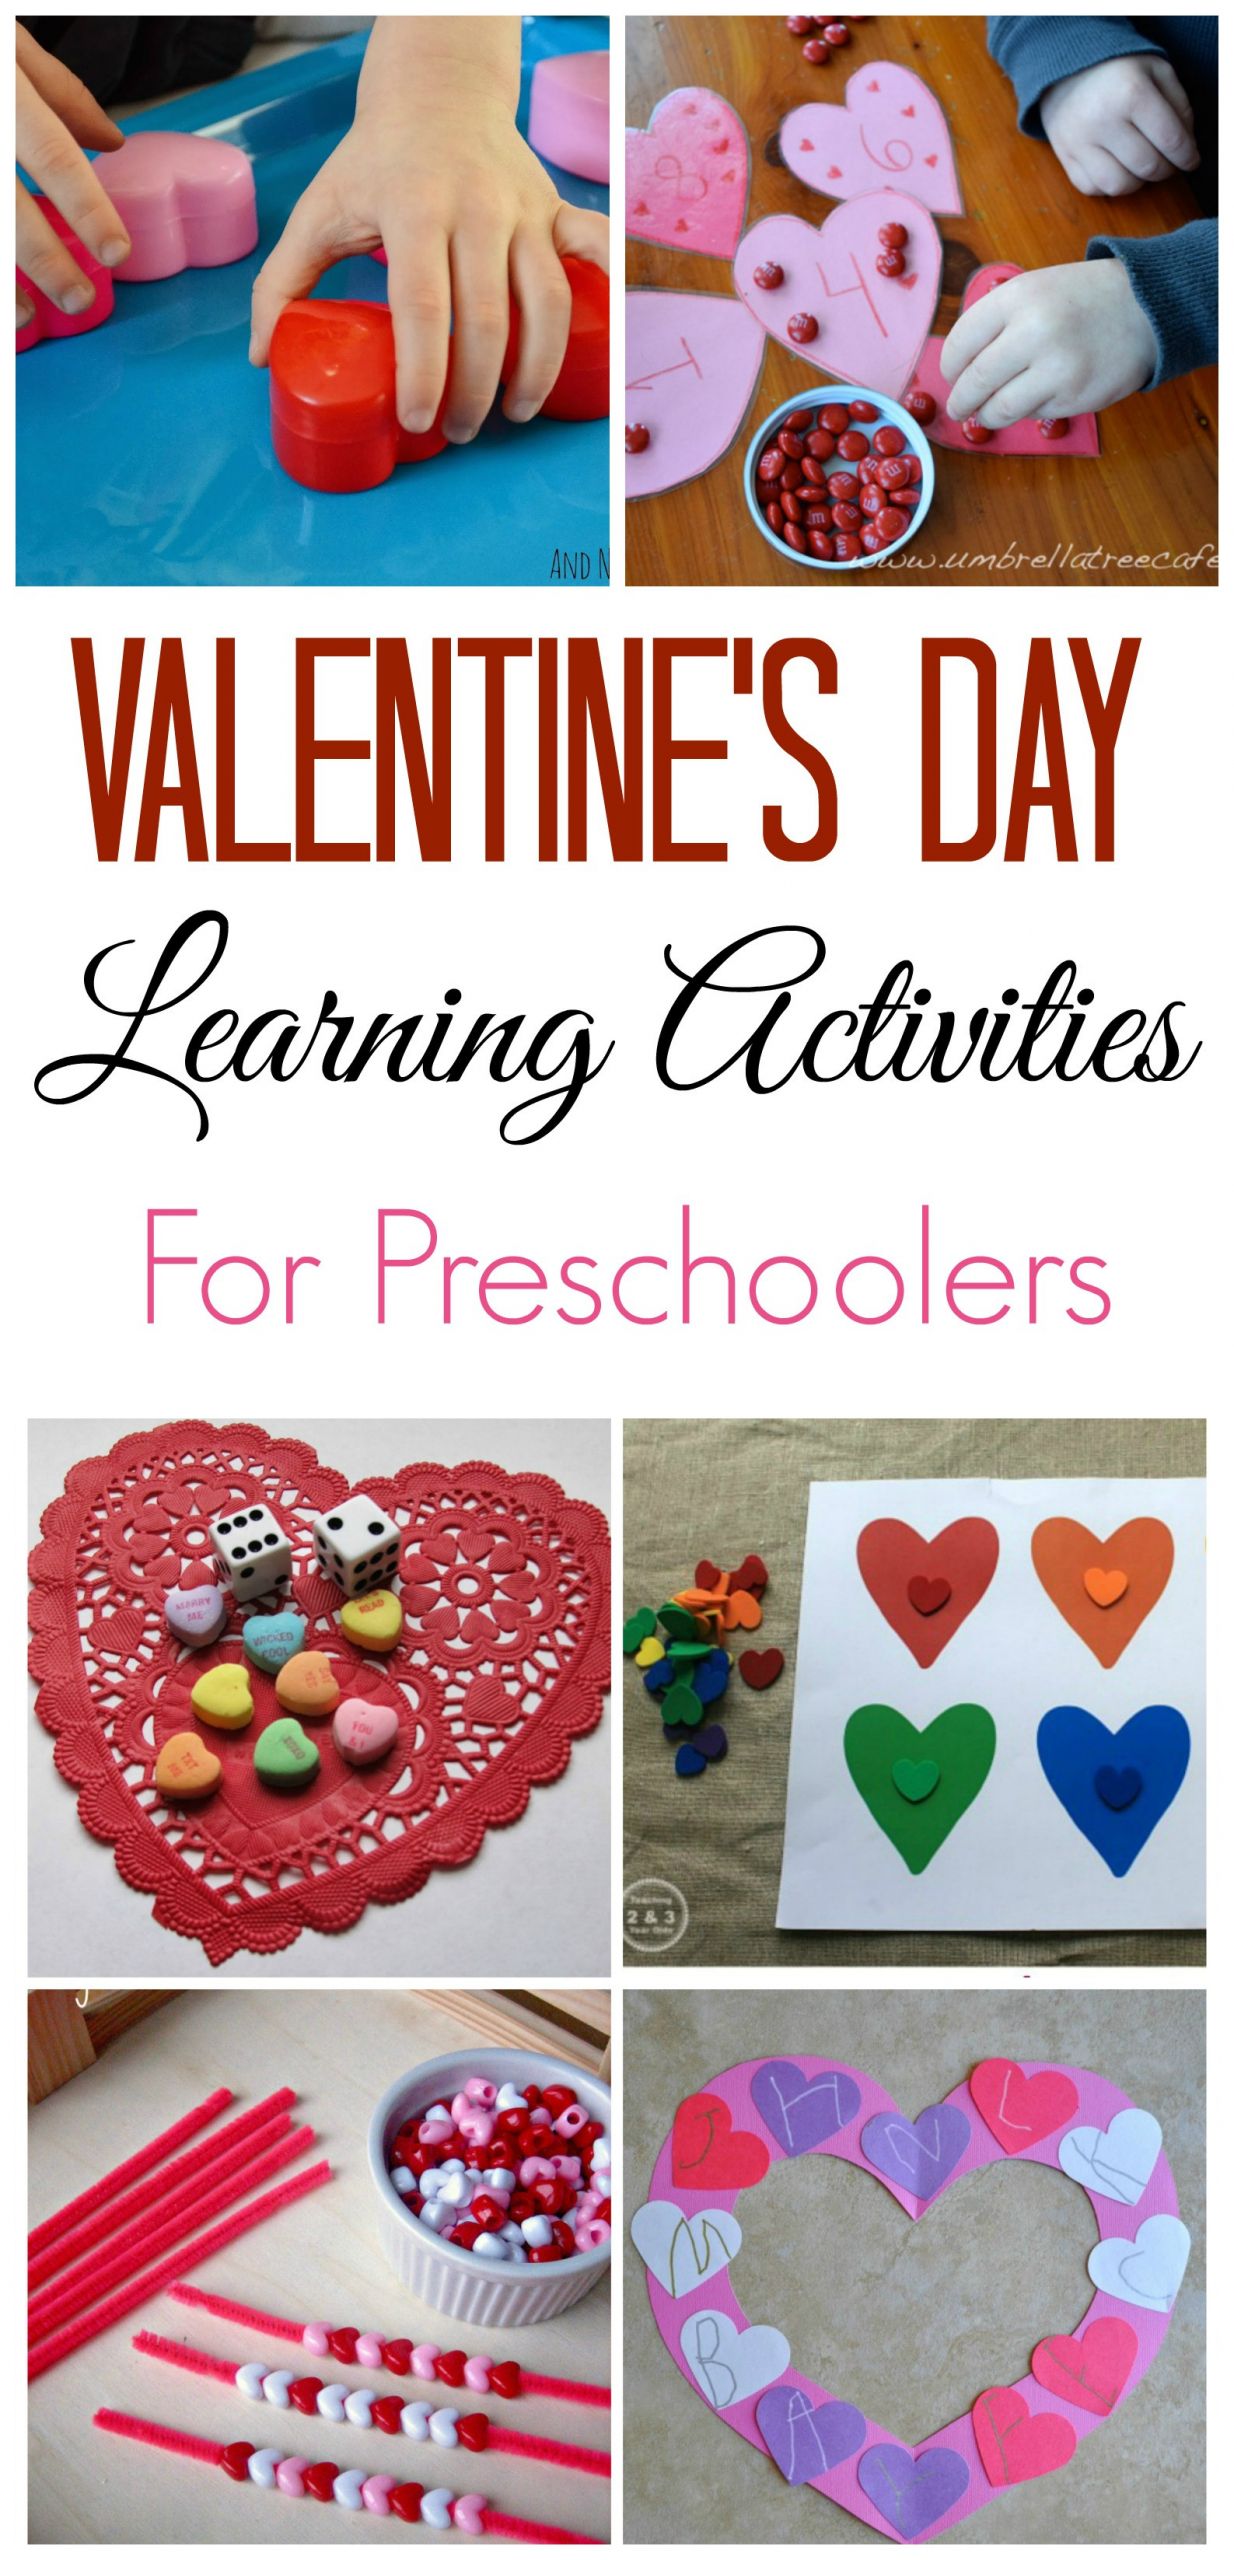 Valentines Day Activities For Kids
 Valentine s Day Learning Activities for Preschoolers